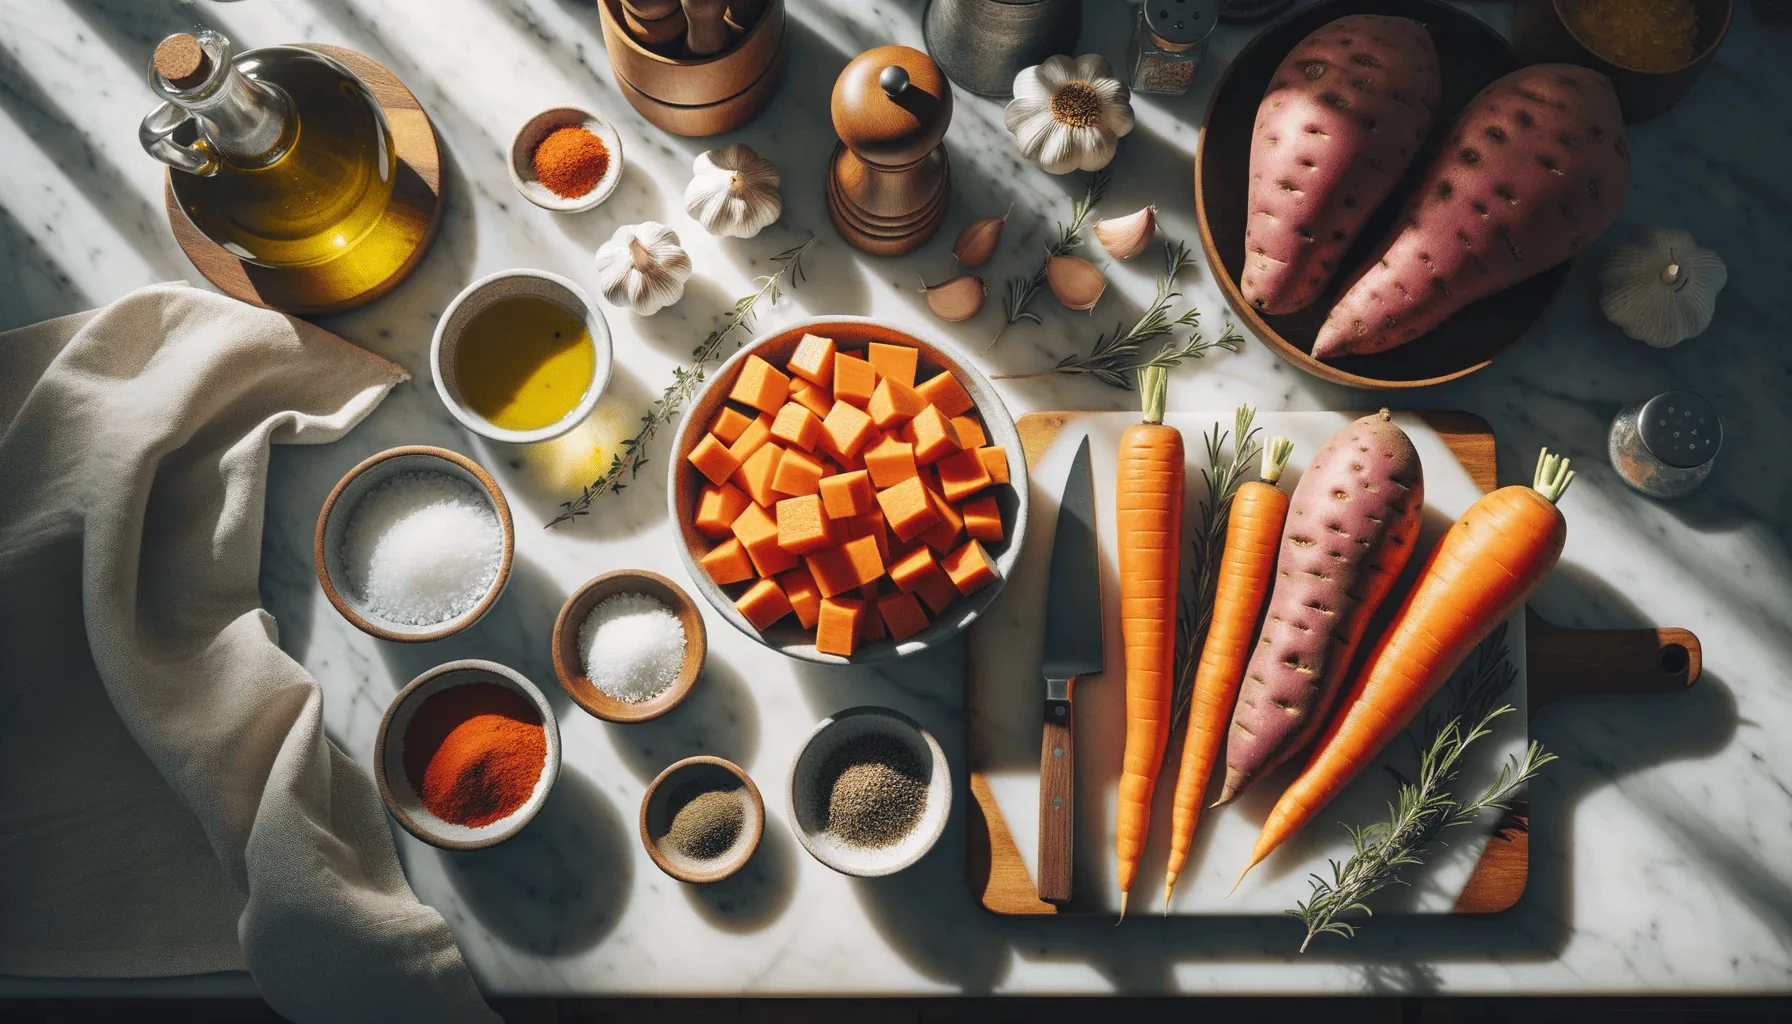 The ingredients for my roasted sweet potatoes and carrots recipe